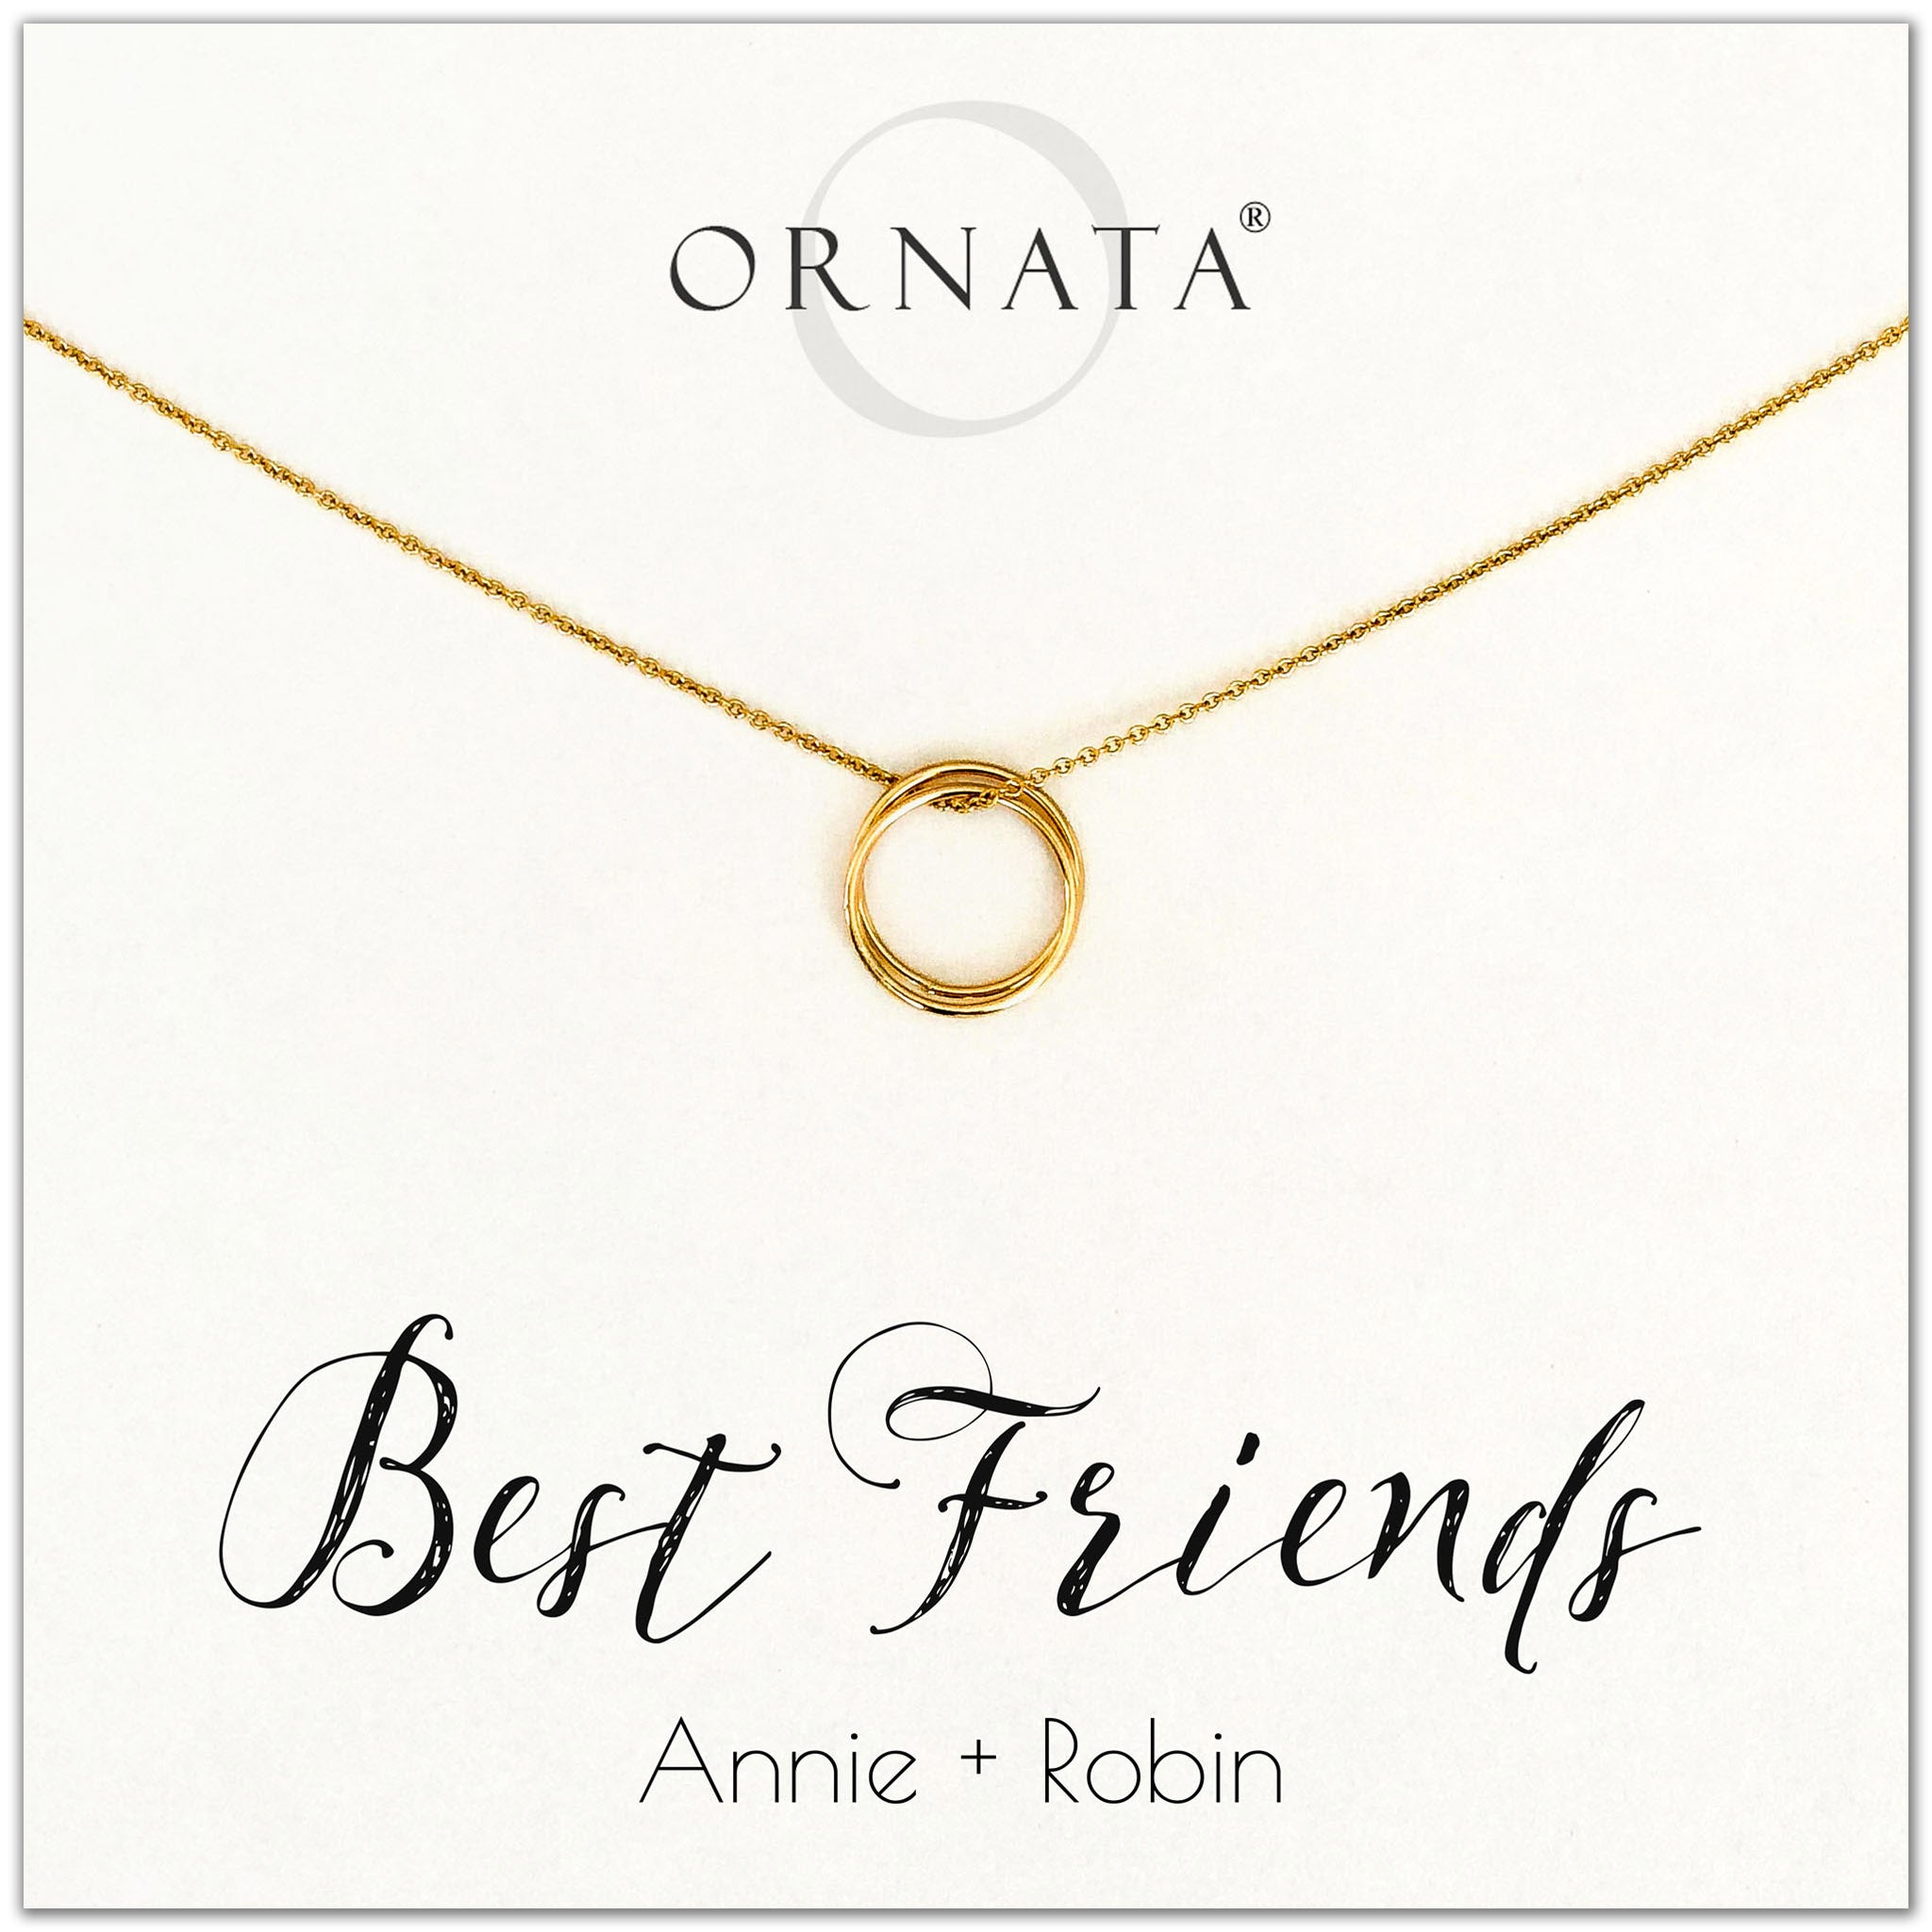 Personalized gold necklaces for best friends. Our 14 karat gold filled custom jewelry is a perfect gift for a sister or best friend. Friendship necklaces make good birthday gifts for best friends or sisters. 